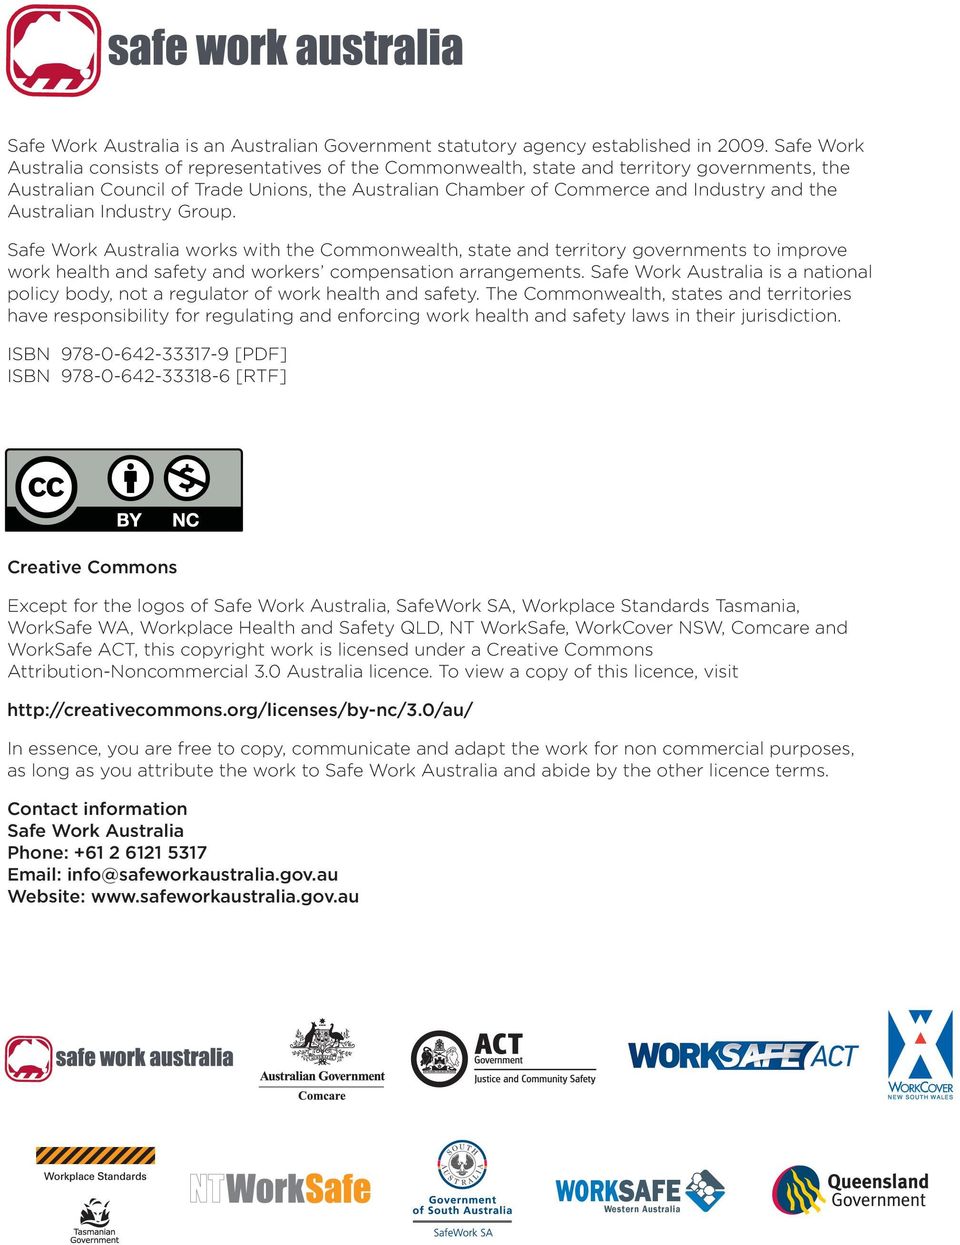 Australian Industry Group. Safe Work Australia works with the Commonwealth, state and territory governments to improve work health and safety and workers compensation arrangements.